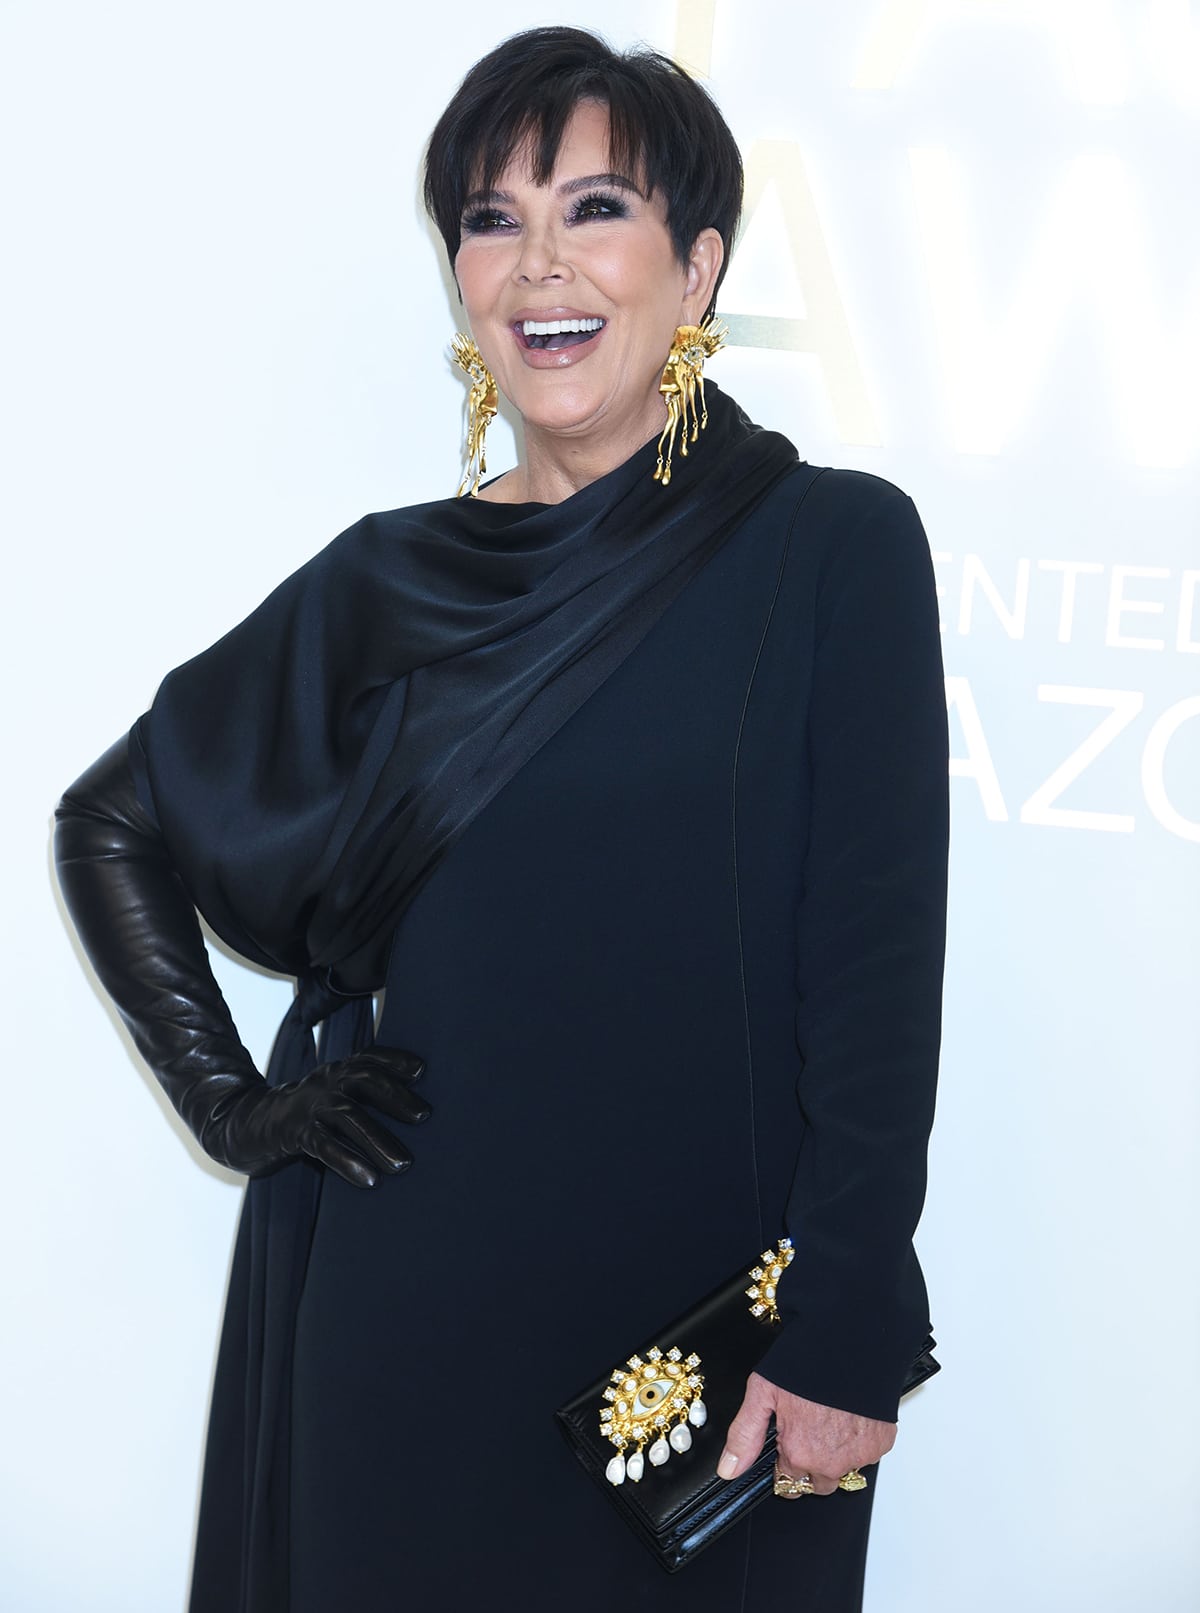 Kris Jenner pairs her black dress with gold accessories, including a pair of Schiaparelli earrings and a matching clutch